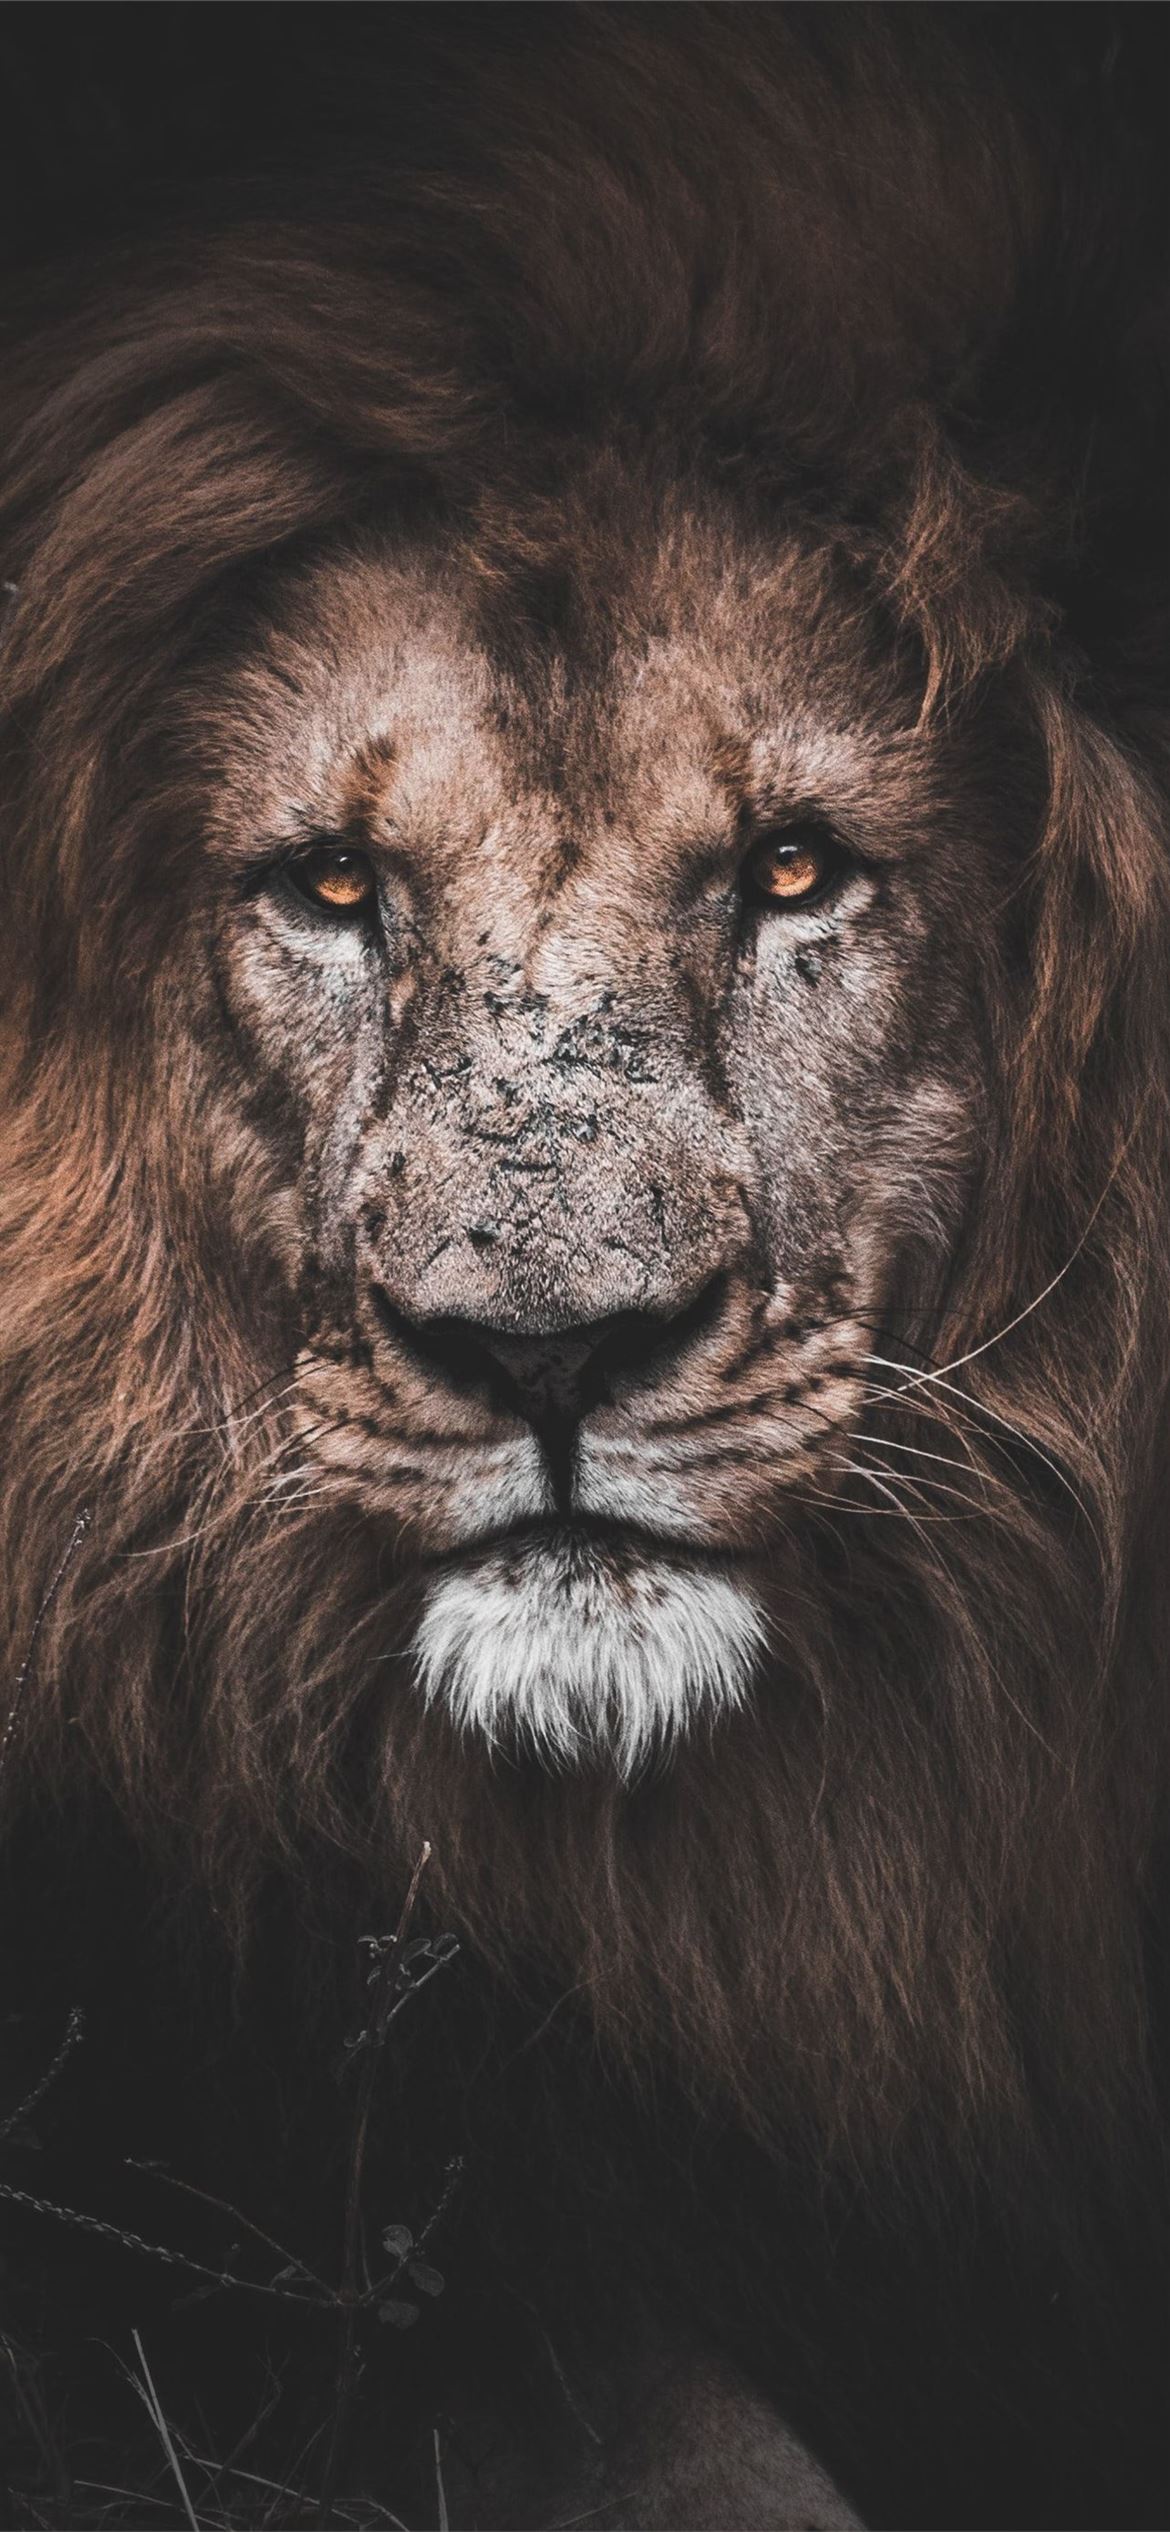 Full HD Lion Top Free Full HD Lion Backgrounds Acc... iPhone Wallpapers  Free Download